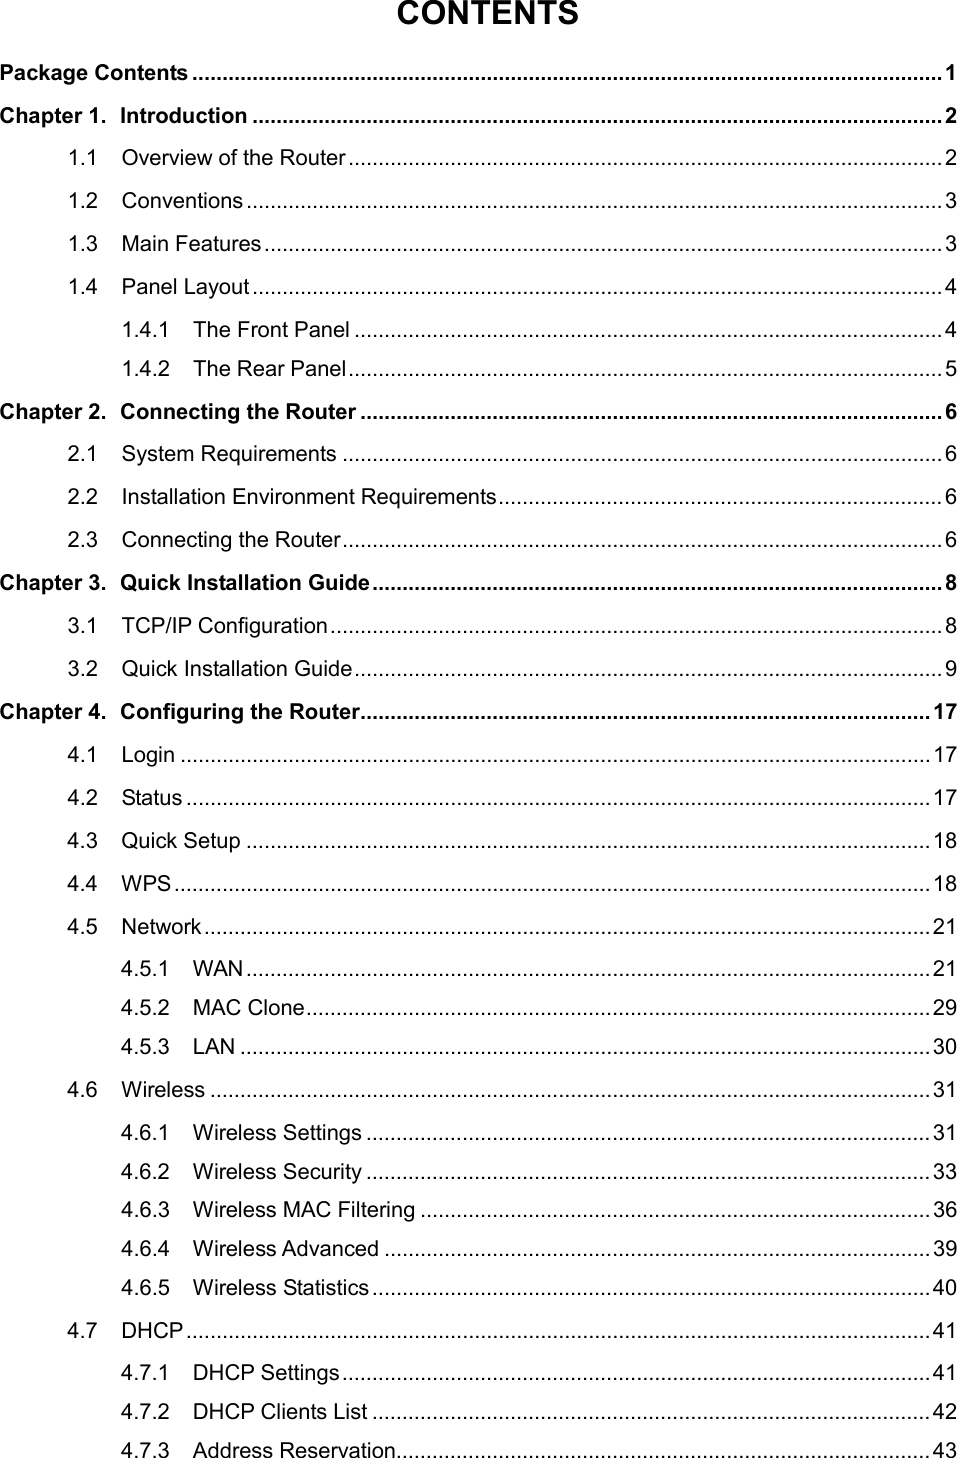  CONTENTS Package Contents ............................................................................................................................. 1 Chapter 1. Introduction ................................................................................................................... 2 1.1 Overview of the Router ................................................................................................... 2 1.2 Conventions .................................................................................................................... 3 1.3 Main Features ................................................................................................................. 3 1.4 Panel Layout ................................................................................................................... 4 1.4.1 The Front Panel .................................................................................................. 4 1.4.2 The Rear Panel ................................................................................................... 5 Chapter 2. Connecting the Router ................................................................................................. 6 2.1 System Requirements .................................................................................................... 6 2.2 Installation Environment Requirements .......................................................................... 6 2.3 Connecting the Router .................................................................................................... 6 Chapter 3. Quick Installation Guide ............................................................................................... 8 3.1 TCP/IP Configuration ...................................................................................................... 8 3.2 Quick Installation Guide .................................................................................................. 9 Chapter 4. Configuring the Router ............................................................................................... 17 4.1 Login ............................................................................................................................. 17 4.2 Status ............................................................................................................................ 17 4.3 Quick Setup .................................................................................................................. 18 4.4 WPS .............................................................................................................................. 18 4.5 Network ......................................................................................................................... 21 4.5.1 WAN .................................................................................................................. 21 4.5.2 MAC Clone ........................................................................................................ 29 4.5.3 LAN ................................................................................................................... 30 4.6 Wireless ........................................................................................................................ 31 4.6.1 Wireless Settings .............................................................................................. 31 4.6.2 Wireless Security .............................................................................................. 33 4.6.3 Wireless MAC Filtering ..................................................................................... 36 4.6.4 Wireless Advanced ........................................................................................... 39 4.6.5 Wireless Statistics ............................................................................................. 40 4.7 DHCP ............................................................................................................................ 41 4.7.1 DHCP Settings .................................................................................................. 41 4.7.2 DHCP Clients List ............................................................................................. 42 4.7.3 Address Reservation......................................................................................... 43  